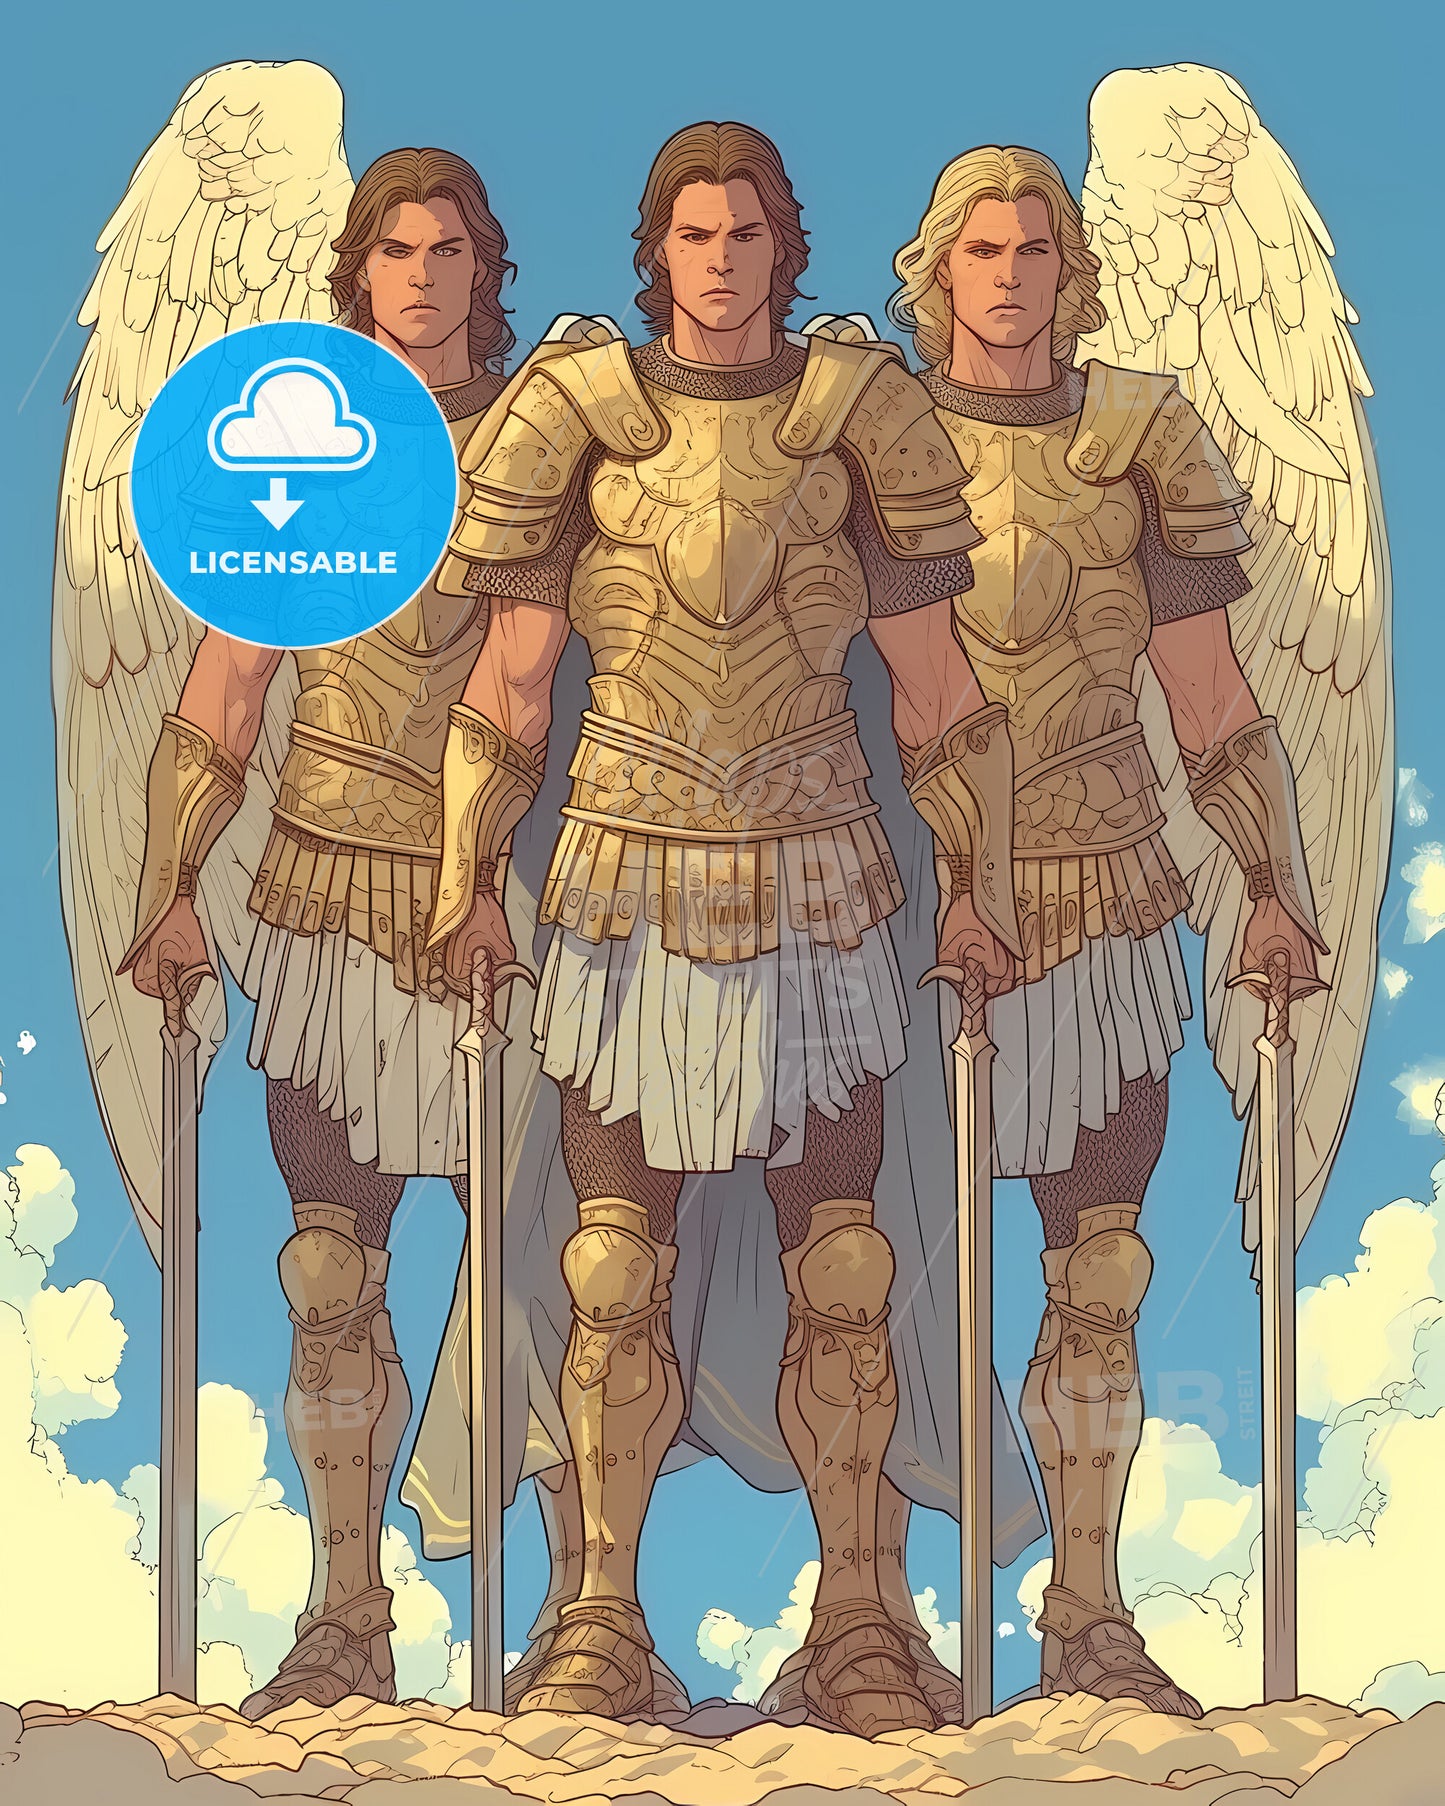 Group Of The Three Archangels St - A Group Of Men Wearing Armor And Holding Swords